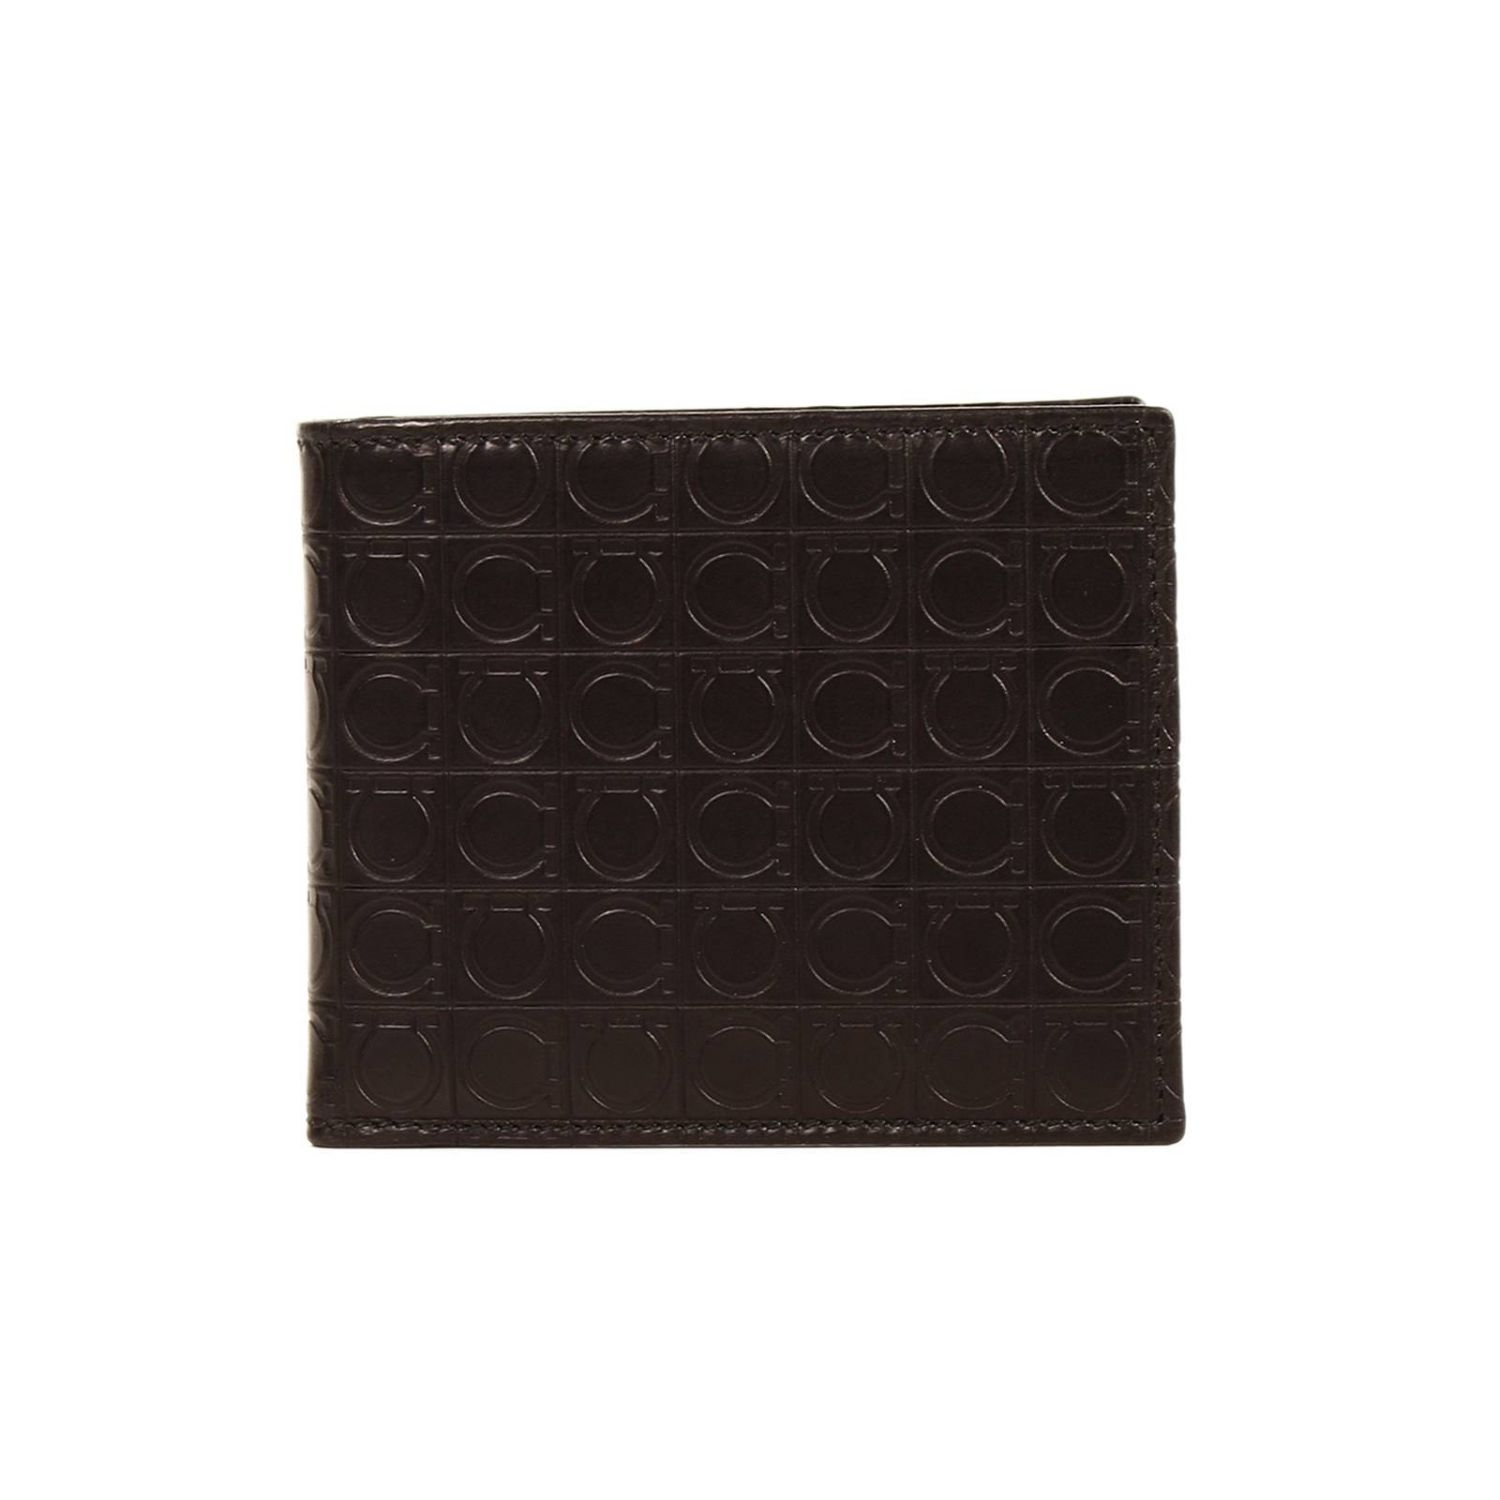 SALVATORE FERRAGAMO: GAMMA SOFT LEATHER WITH LOGO AND CREDIT CARD SLOTS ...